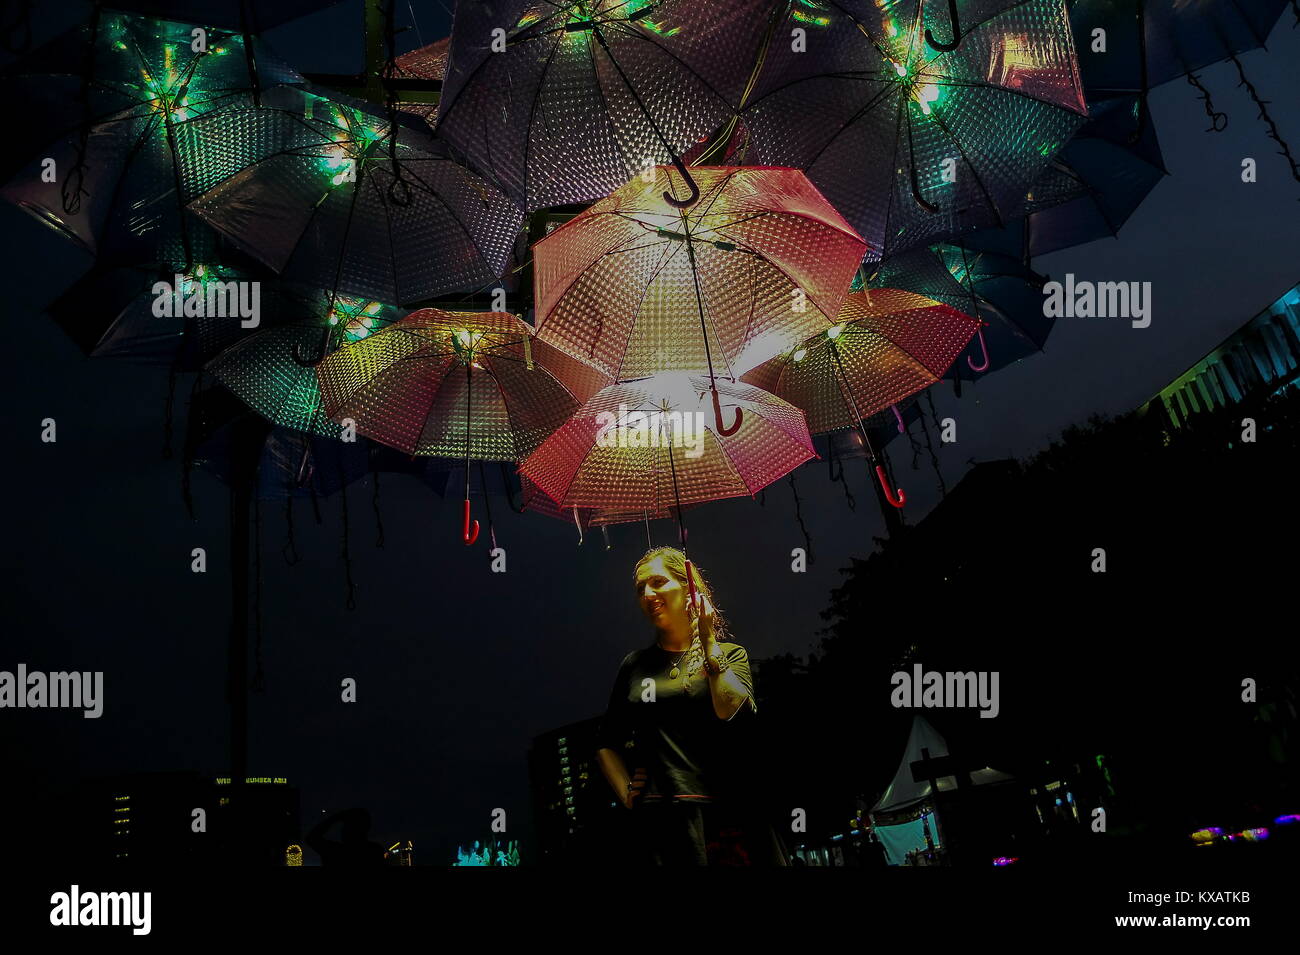 KUALA LUMPUR, MALAYSIA - DECEMBER 28: A women is seen stand under the light umbrella during the Putrajaya Lighting Festival on December 28, 2017 in Putrajaya, Malaysia. The four-night festival featured a light art communities and university students in Malaysia showcasing their creativity of light-themed events, including Luminous lighting effect show, decorative arch and light structure exhibits, car light show, night fun ride, wayang kulit performance (shadow puppetry), and a light garden . Credit: Samsul Said/AFLO/Alamy Live News Stock Photo